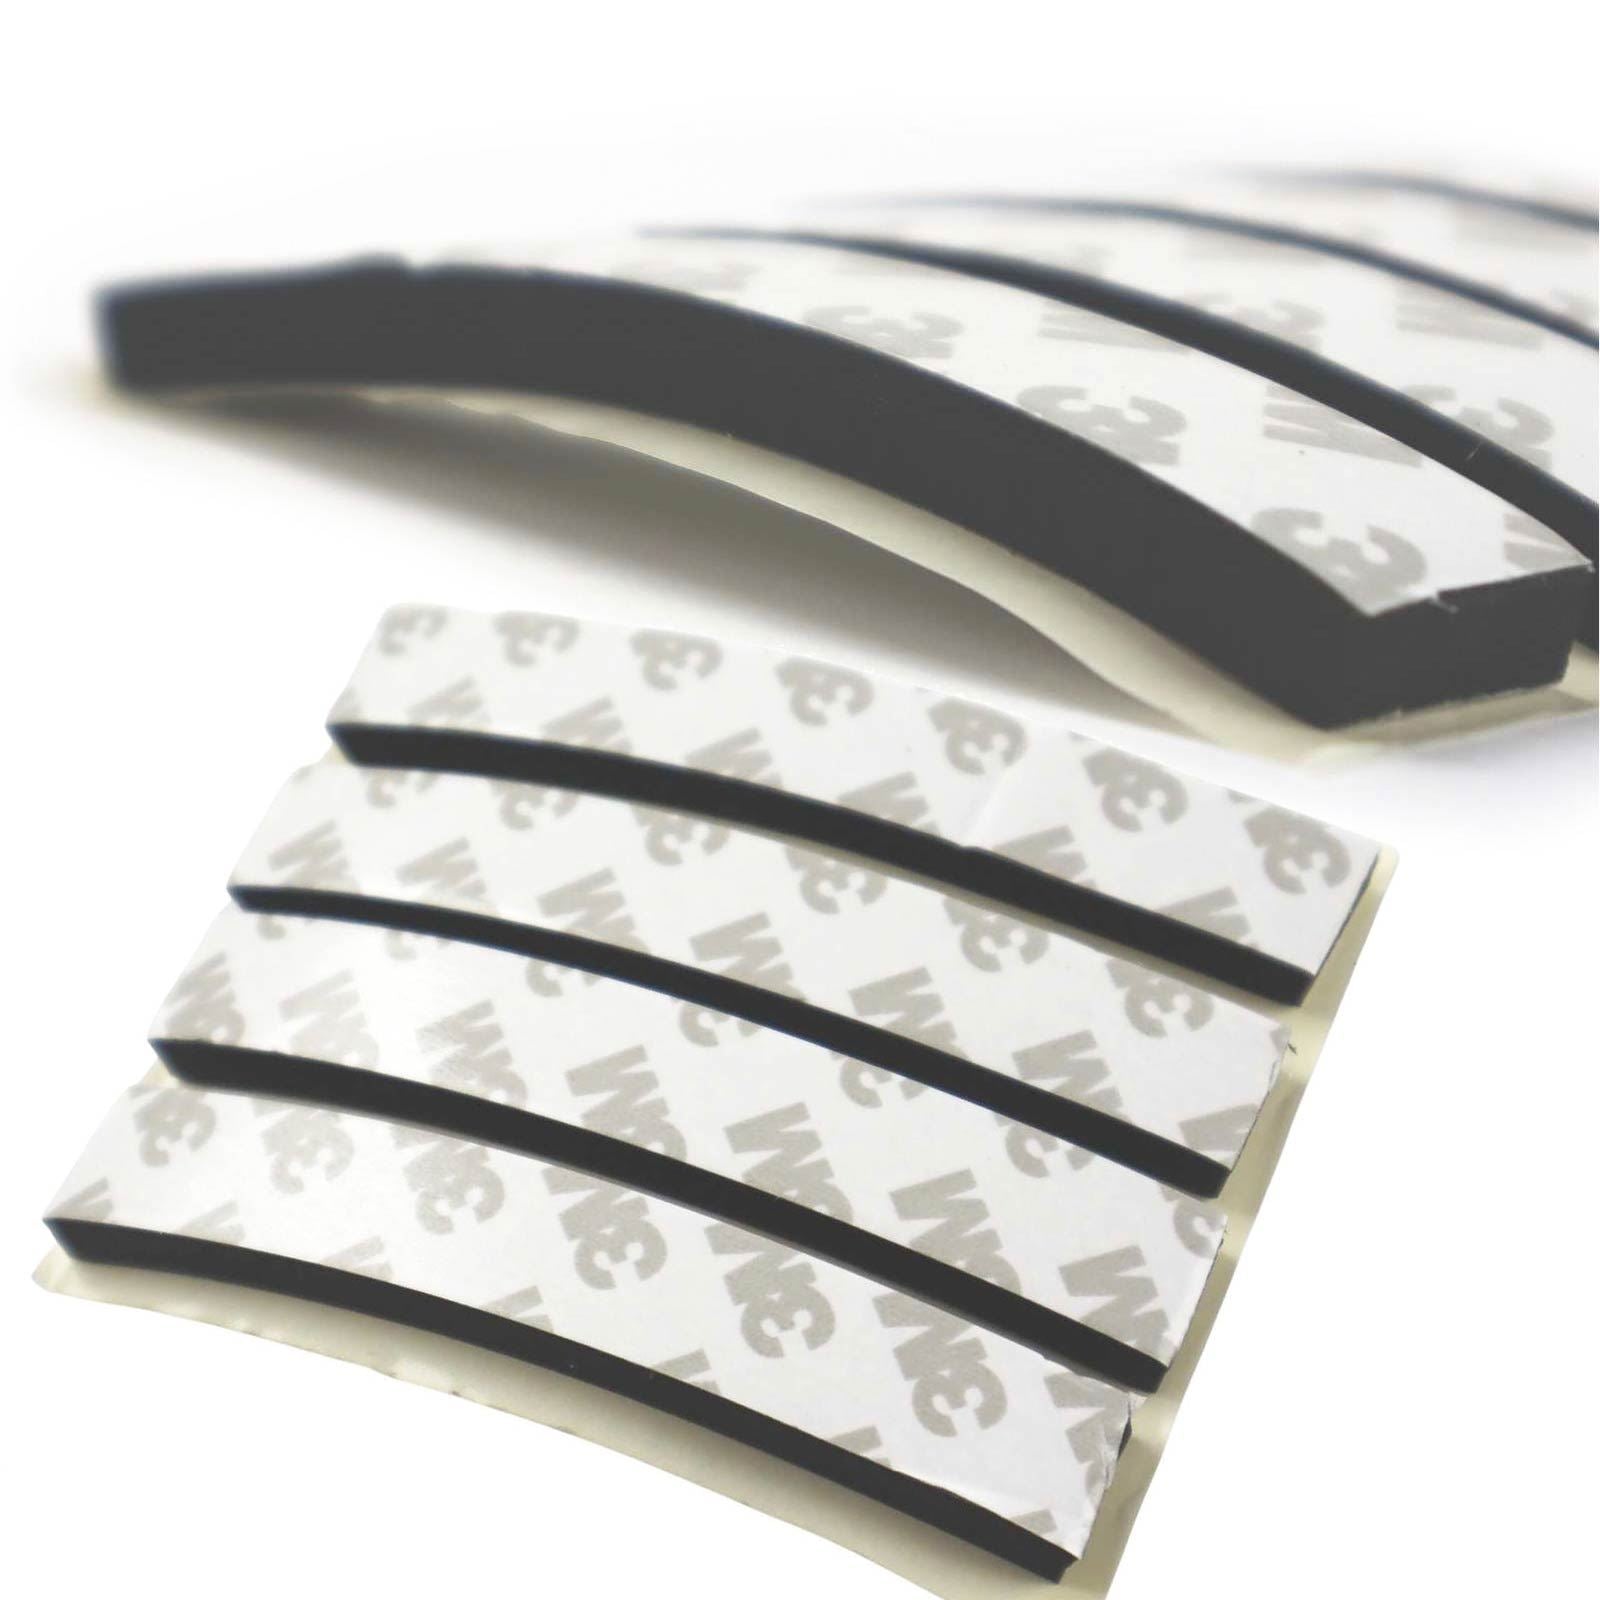 Ultra Thick Heavy Duty 3M Sticky Pads - Number Plate Adhesive Fixing 8mm Tape